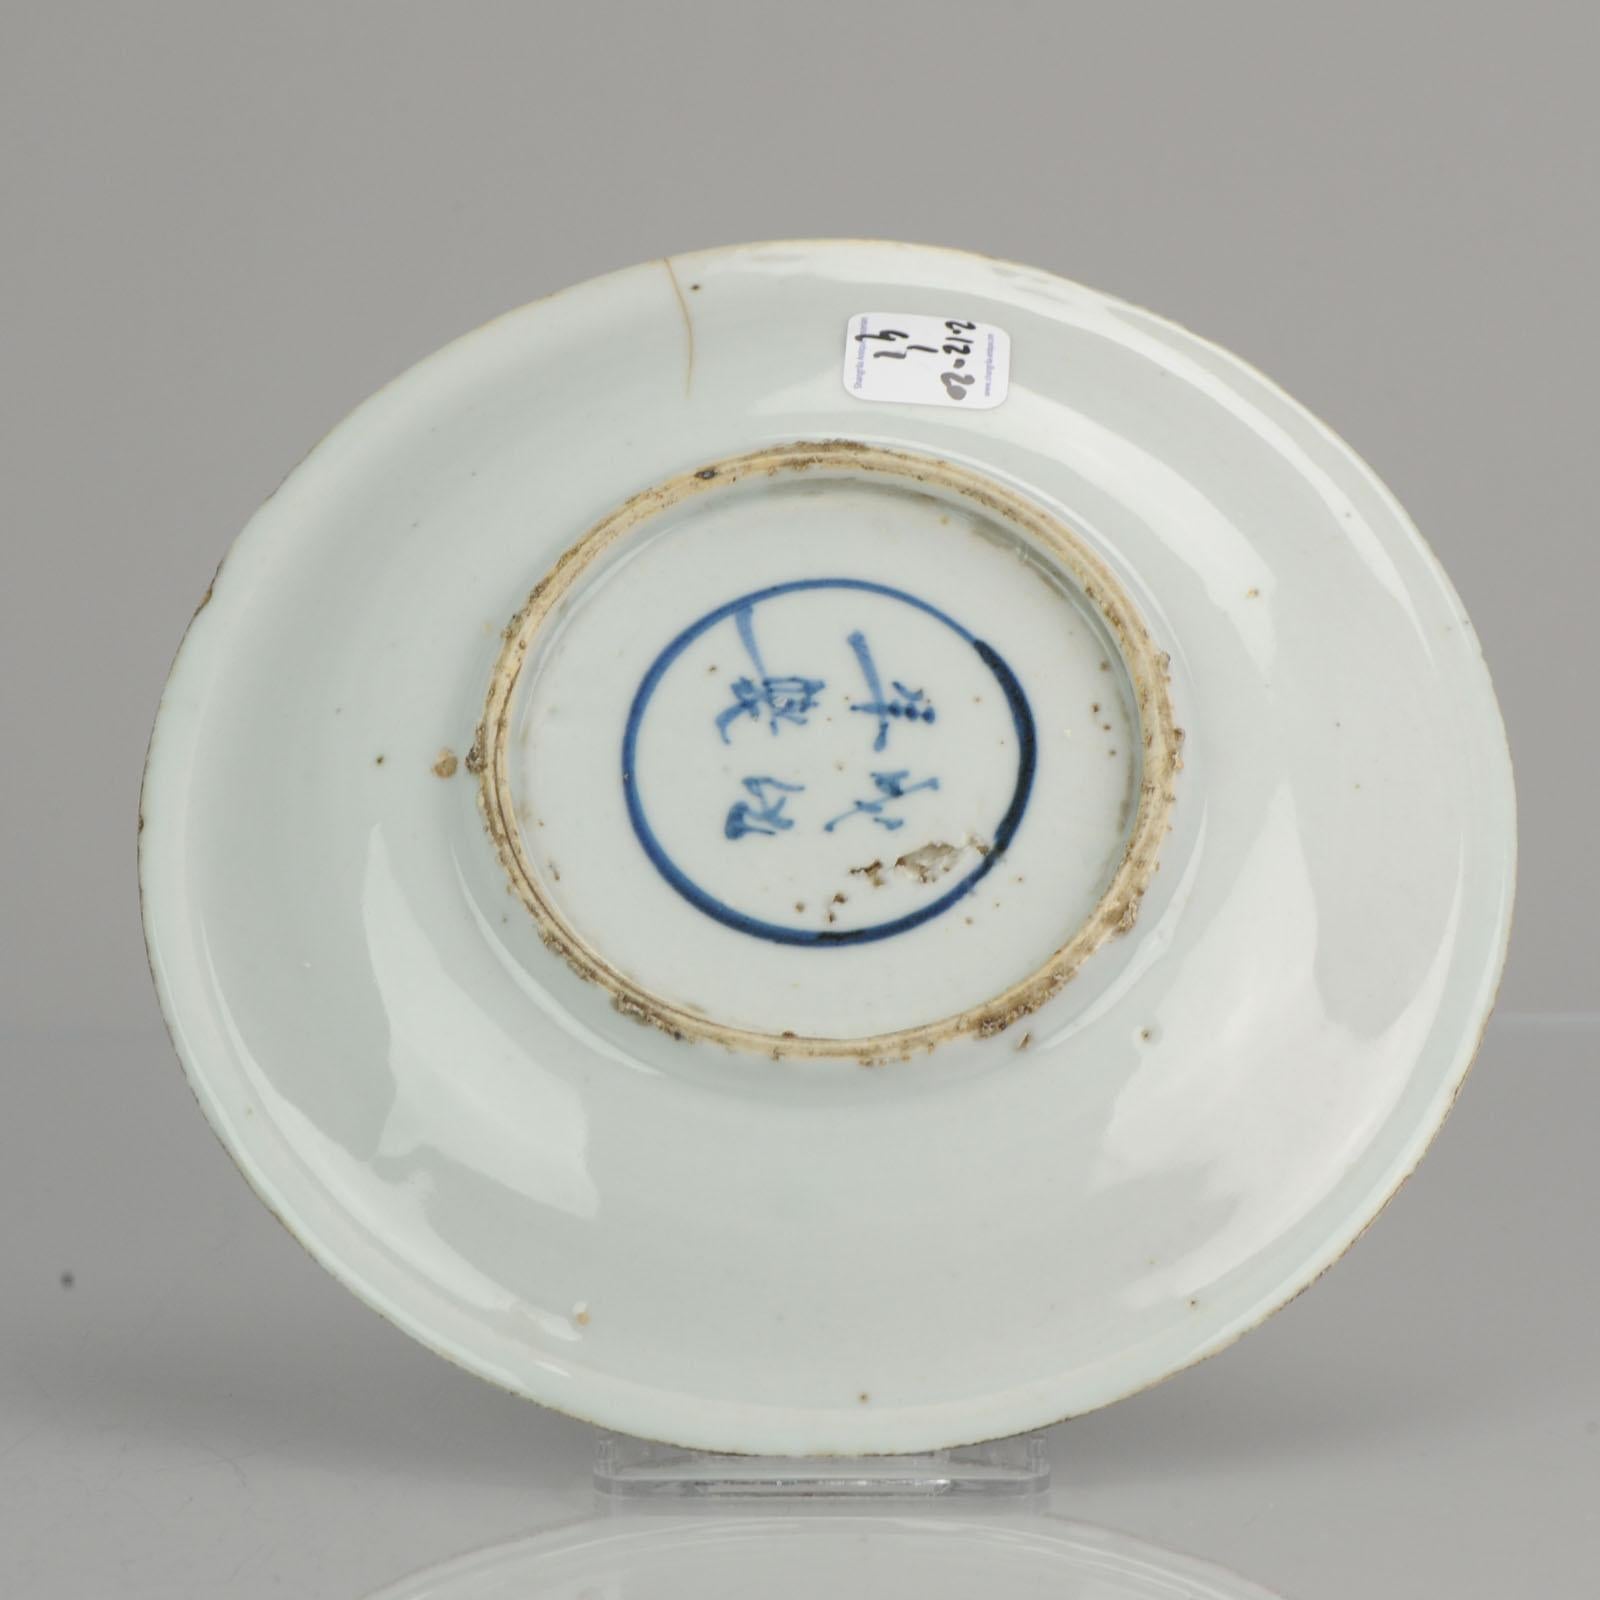 Antique Chinese Wanli / Tianqi Kosometsuke Plate 1600-1644 Porcelain Ming Monk For Sale 3